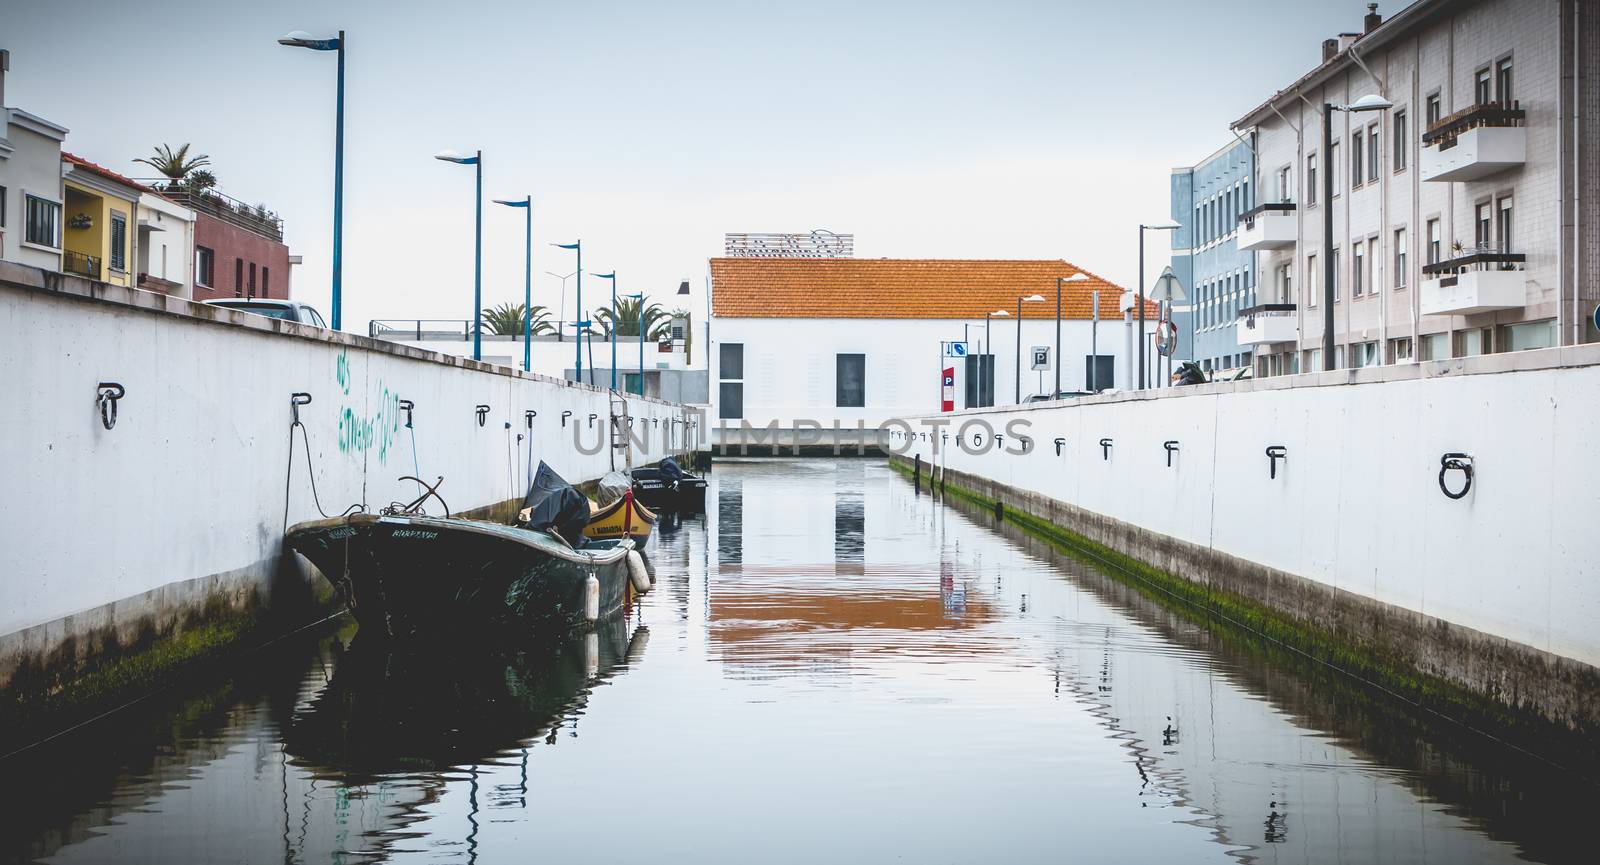 Small boat docked on a canal in aveiro, portugal by AtlanticEUROSTOXX